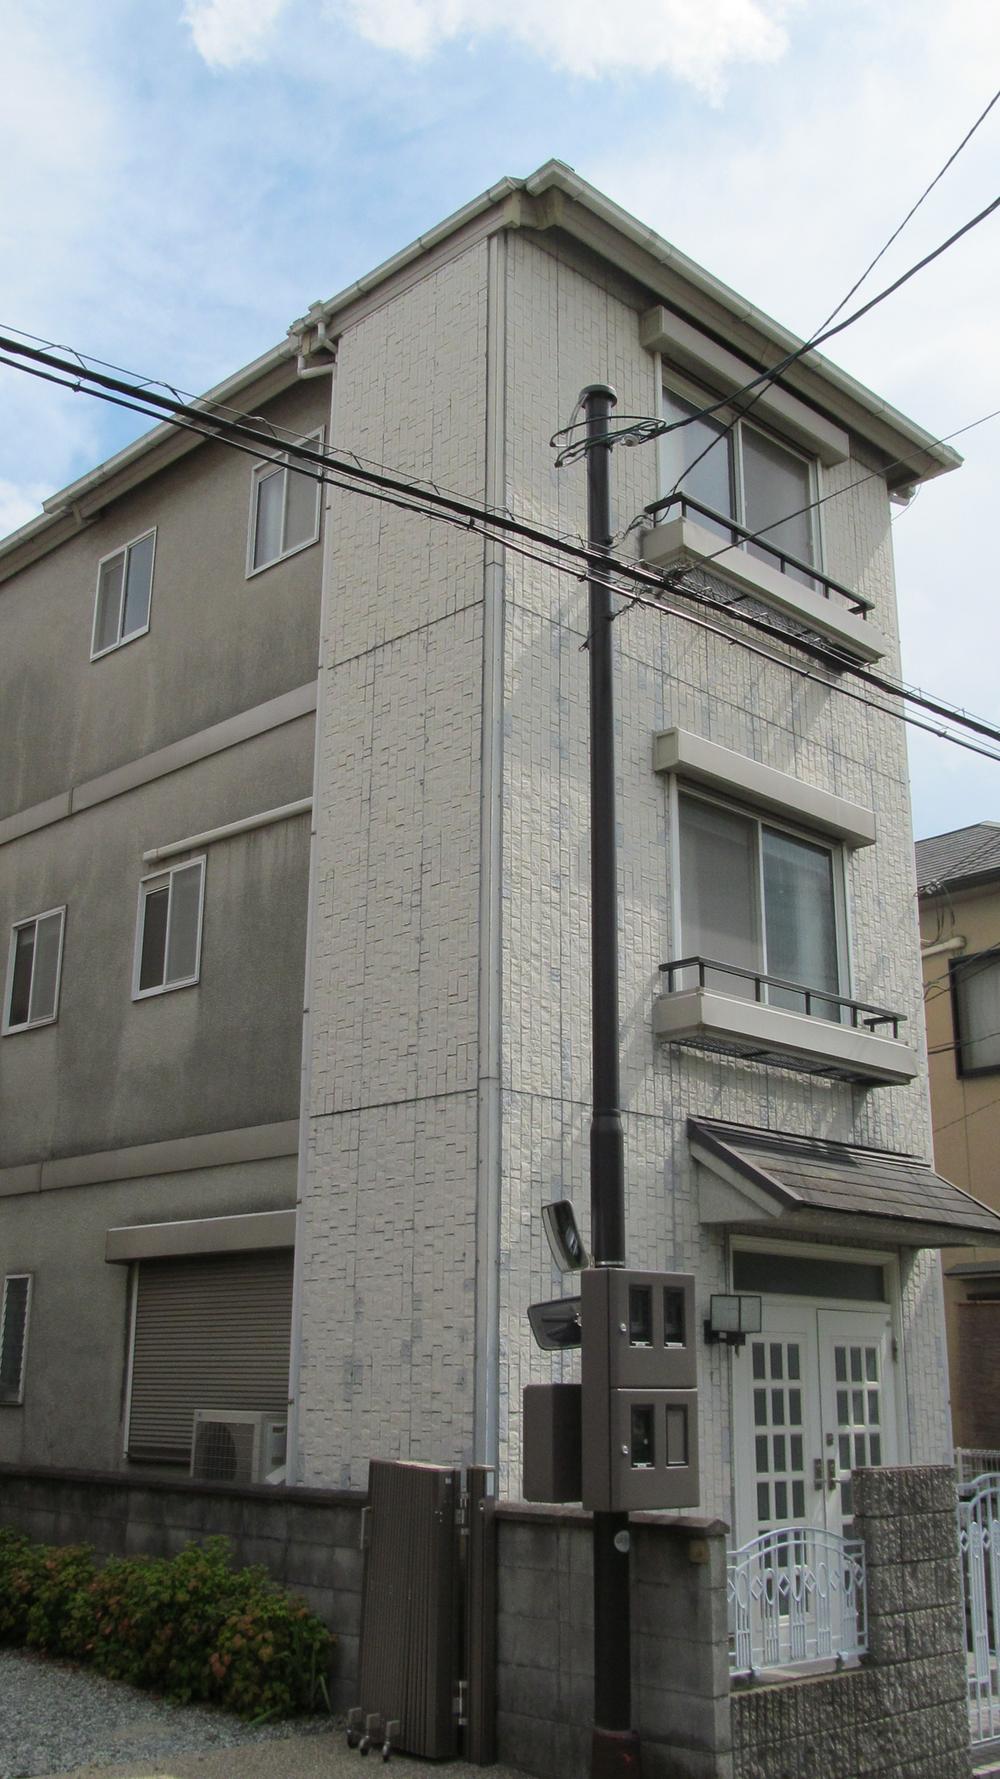 Local appearance photo. It is the third floor House for a quiet residential area